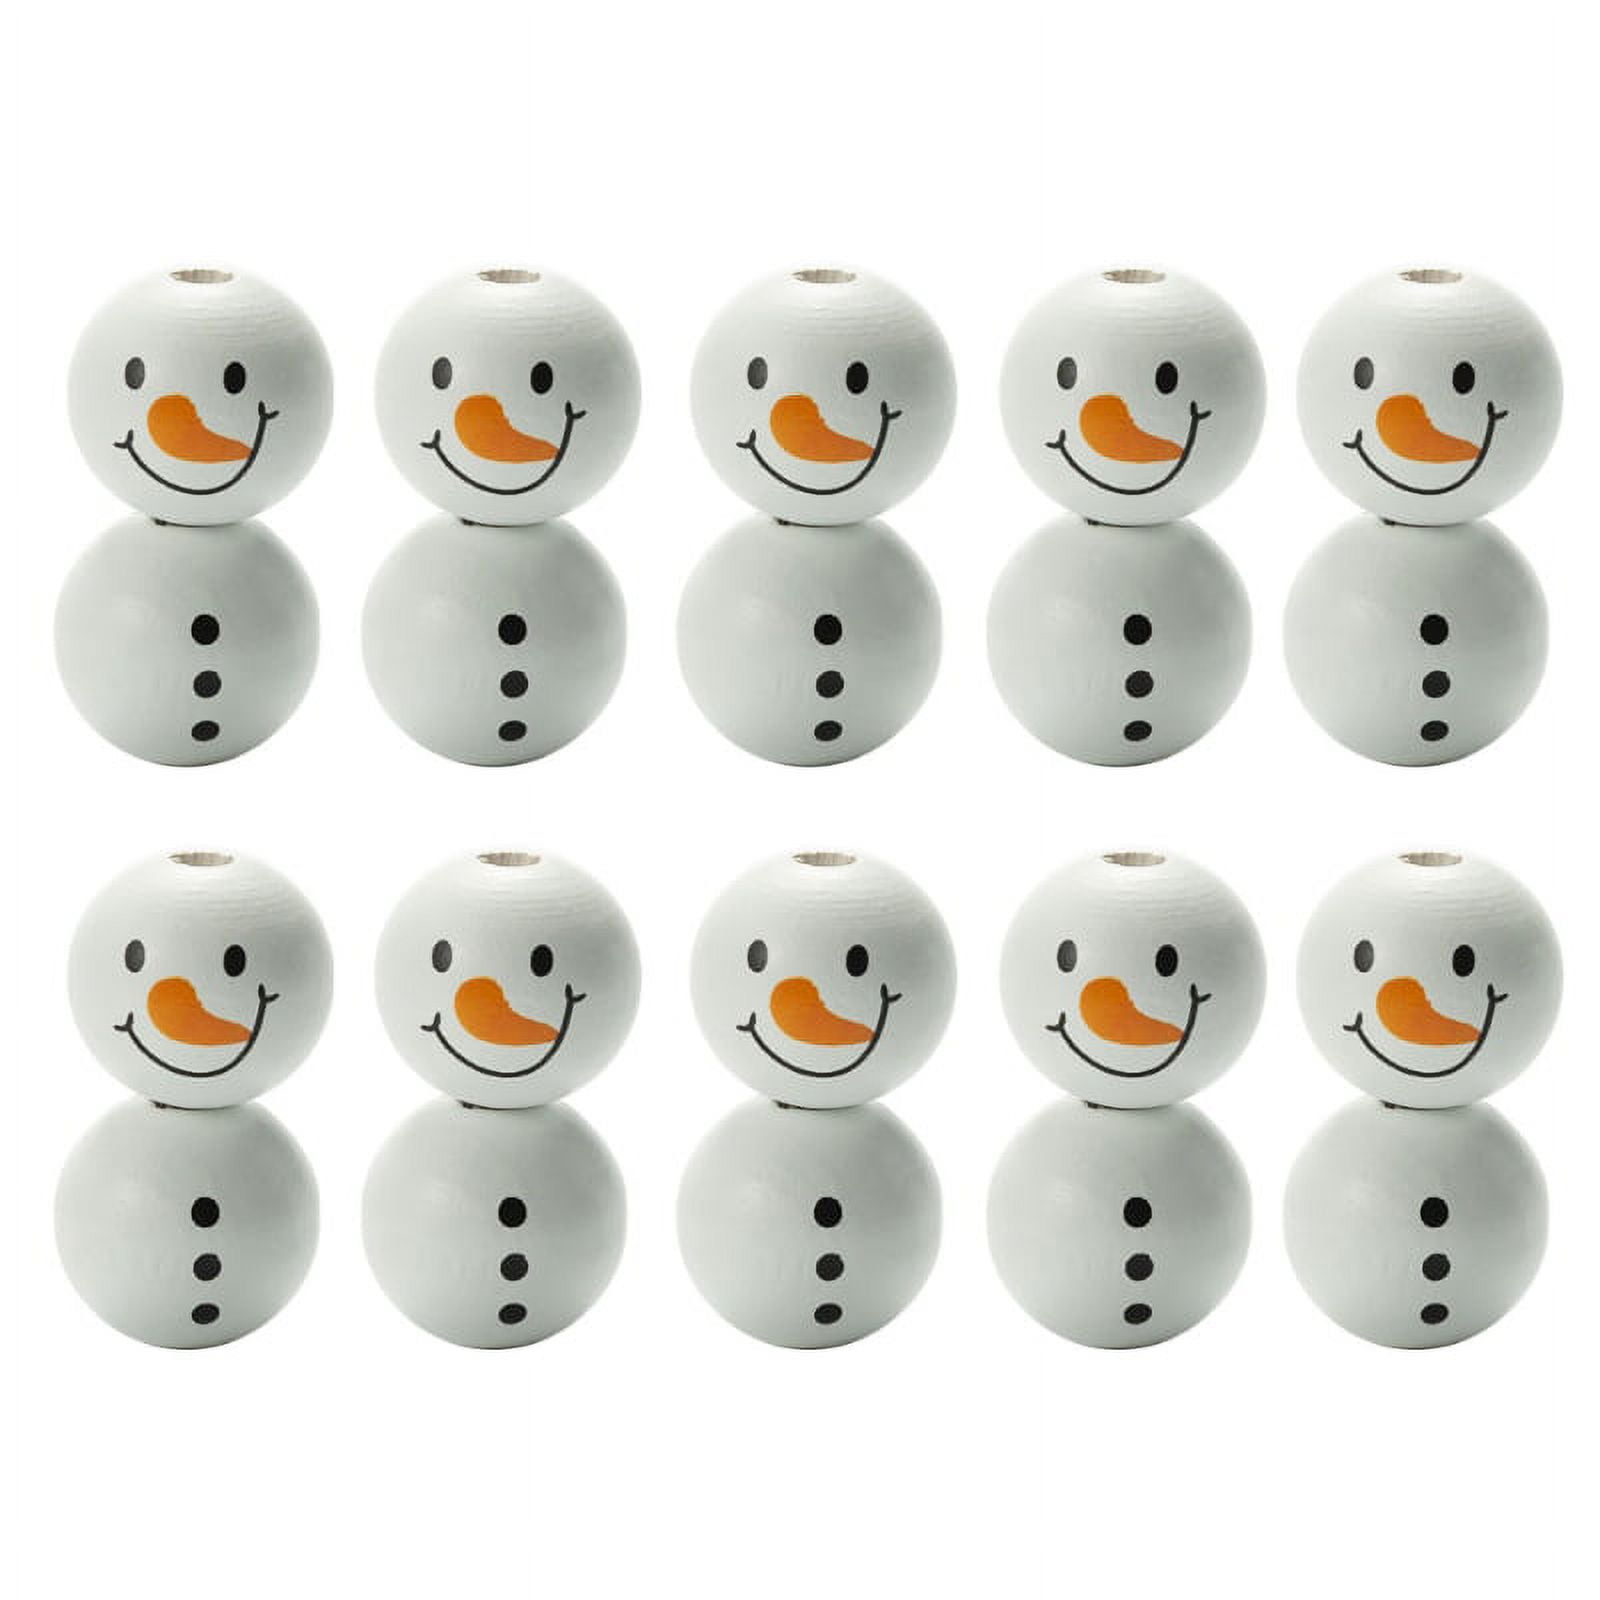  Wooden Craft Beads With Ropes Snowman Beads For Bracelets  Jewelry Making DIY Christmas Decor Art Crafts Gift Wrap Christmas Craft  Beads With Holes Christmas Craft Beads And Gems Christmas Snowman